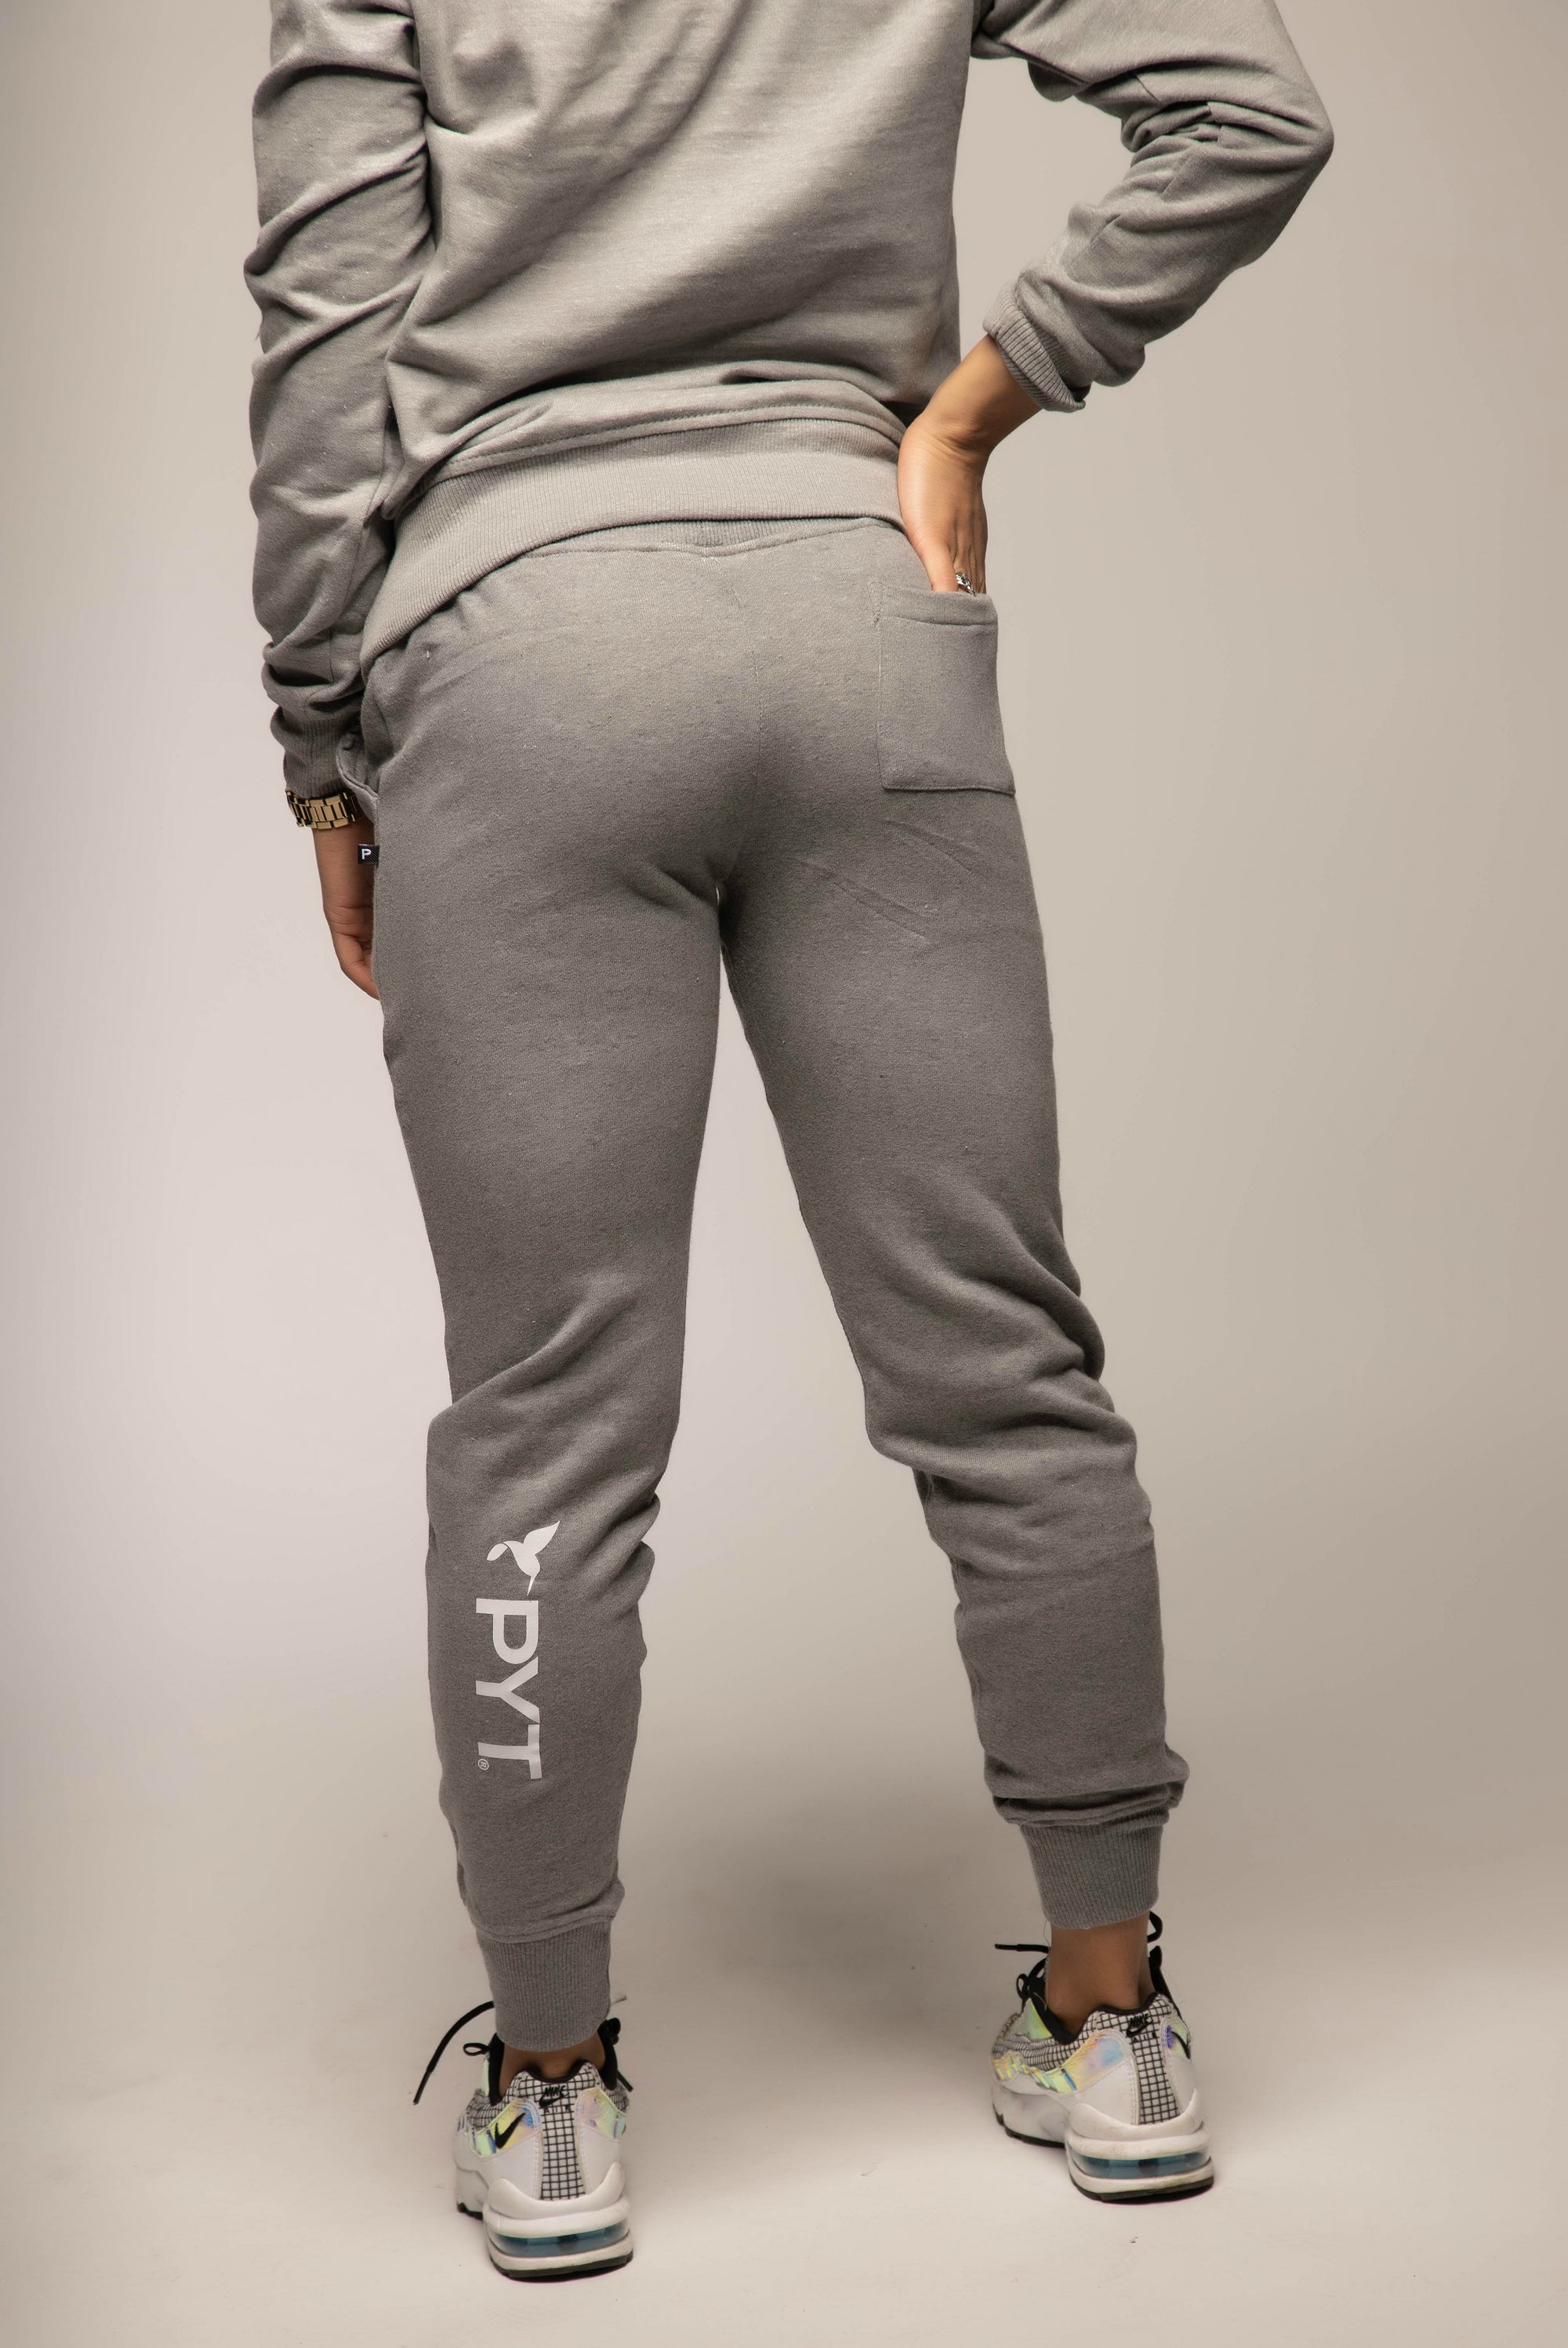 Mens Slim Fit Gym Amazon Track Pants With Pocket Perfect For Workout,  Running, And Fitness Skinny Tracksuit Bottoms M342Q From Zlzol, $33.71 |  DHgate.Com